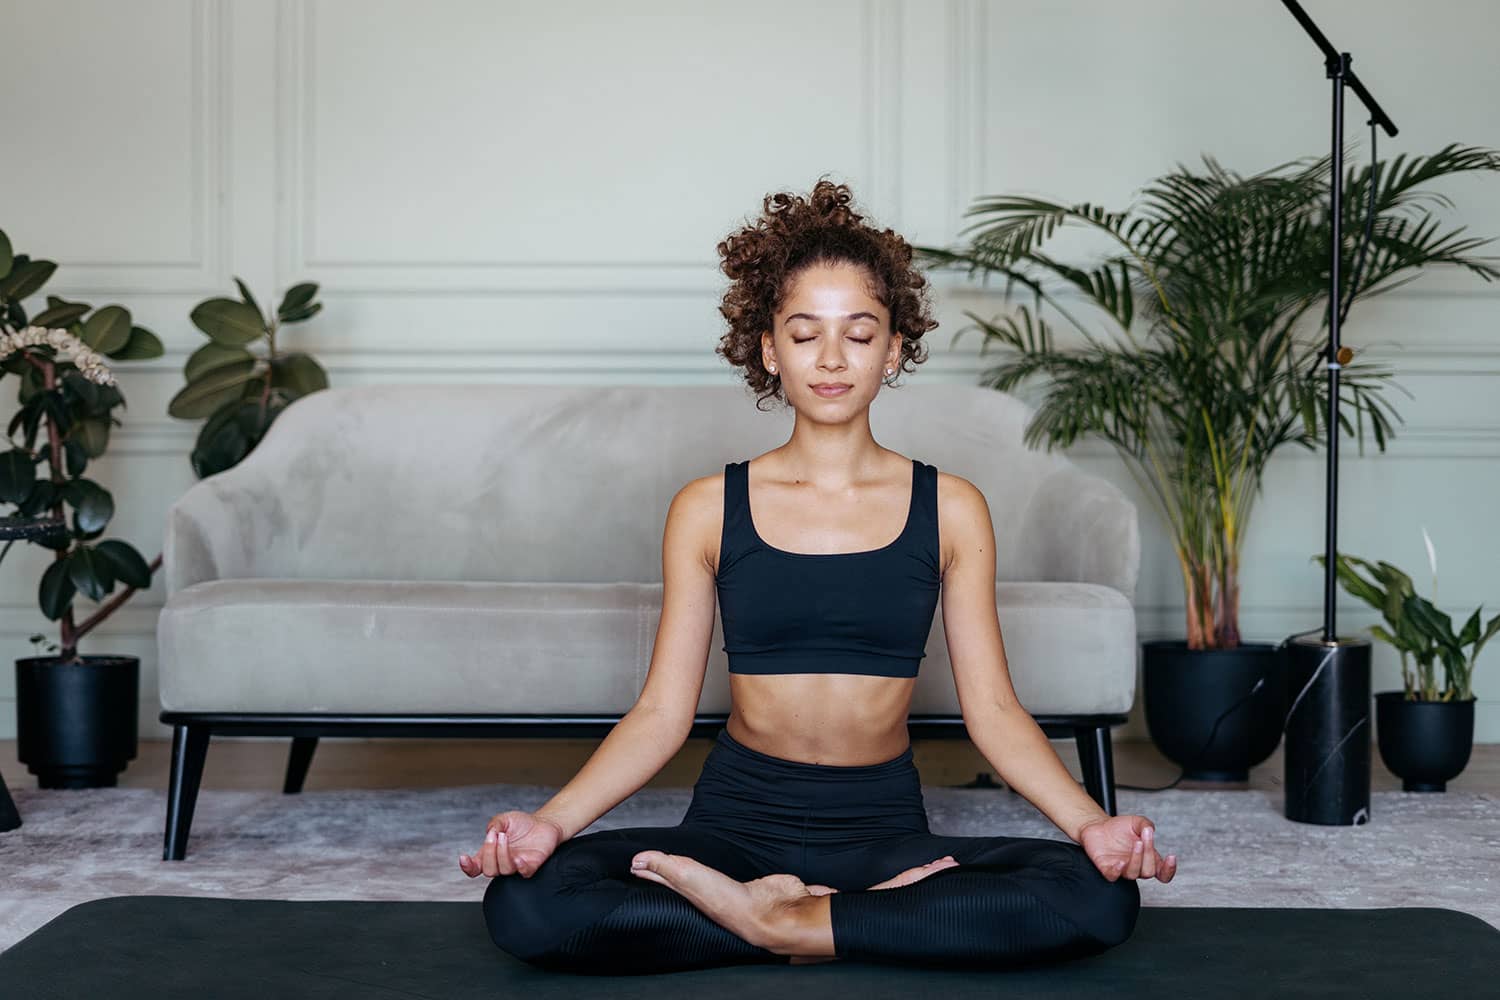 A Step-by-Step Guide to Creating Your Own Meditation Space